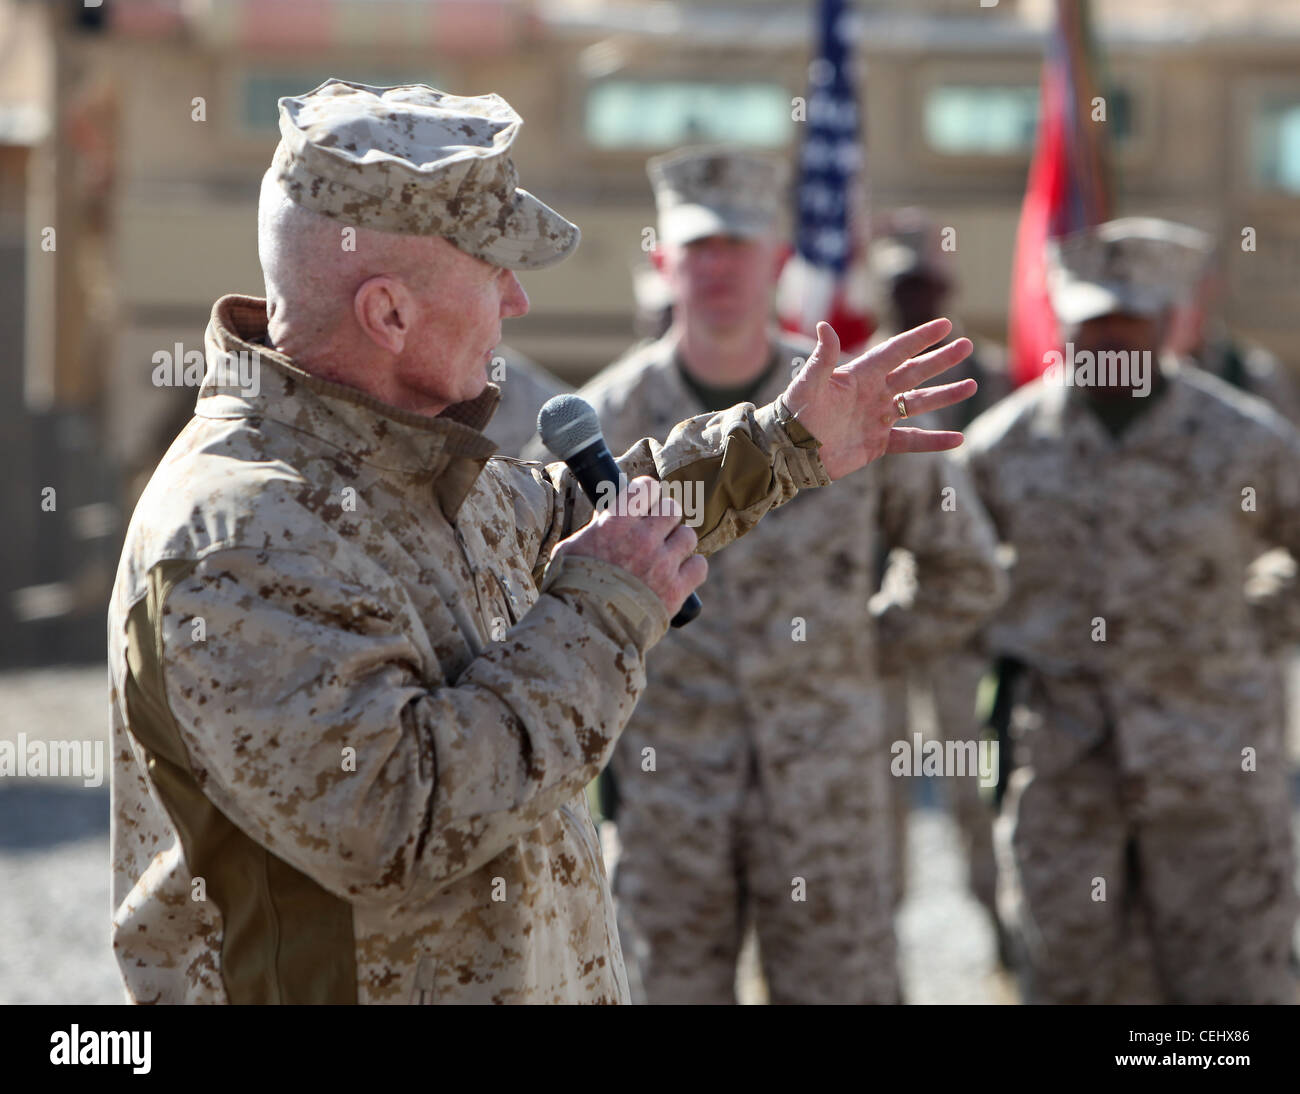 Maj. Gen. John A. Toolan, the commanding general of Regional Command Southwest, praises the Marines and Sailors of 2nd Marine Logistics Group (Forward) during a transfer of authority ceremony aboard Camp Leatherneck, Afghanistan, Feb. 15. For the next year, 1st MLG (FWD) will serve as the Logistics Combat Element in southern Afghanistan. Stock Photo